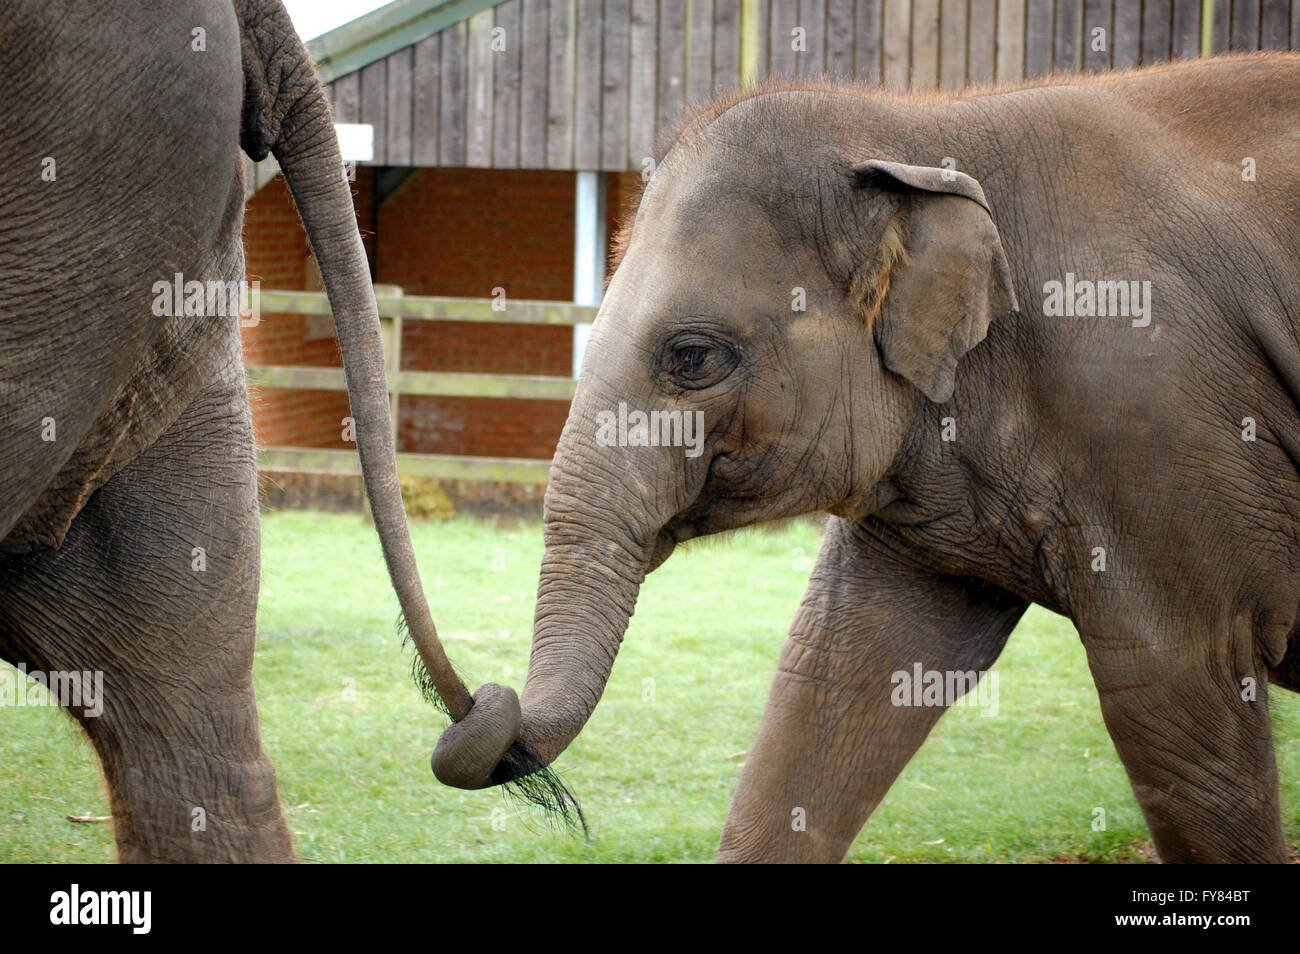 Baby Asian Elephant Walking Behind Holding Its Mother And Holding Her Stock Photo Alamy